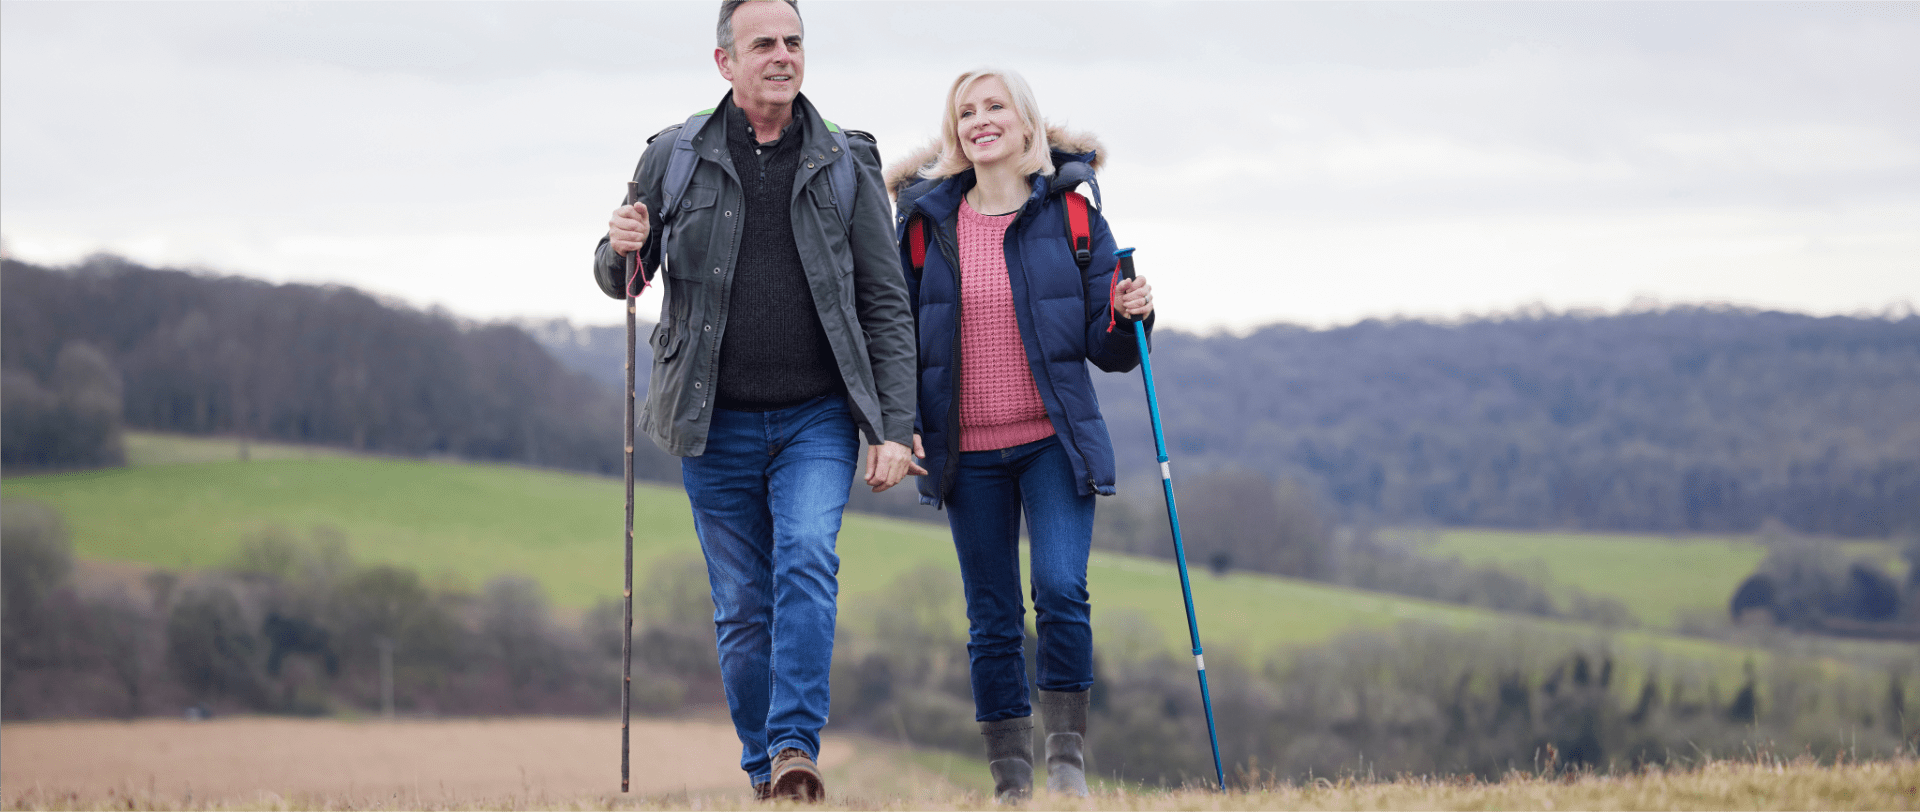 A happy couple enjoying a scenic walk in the countryside, both wearing comfortable shoes that support their bunions. The couple smiles and holds hands as they take in the beautiful surroundings, enjoying the freedom and relaxation of a day outdoors.